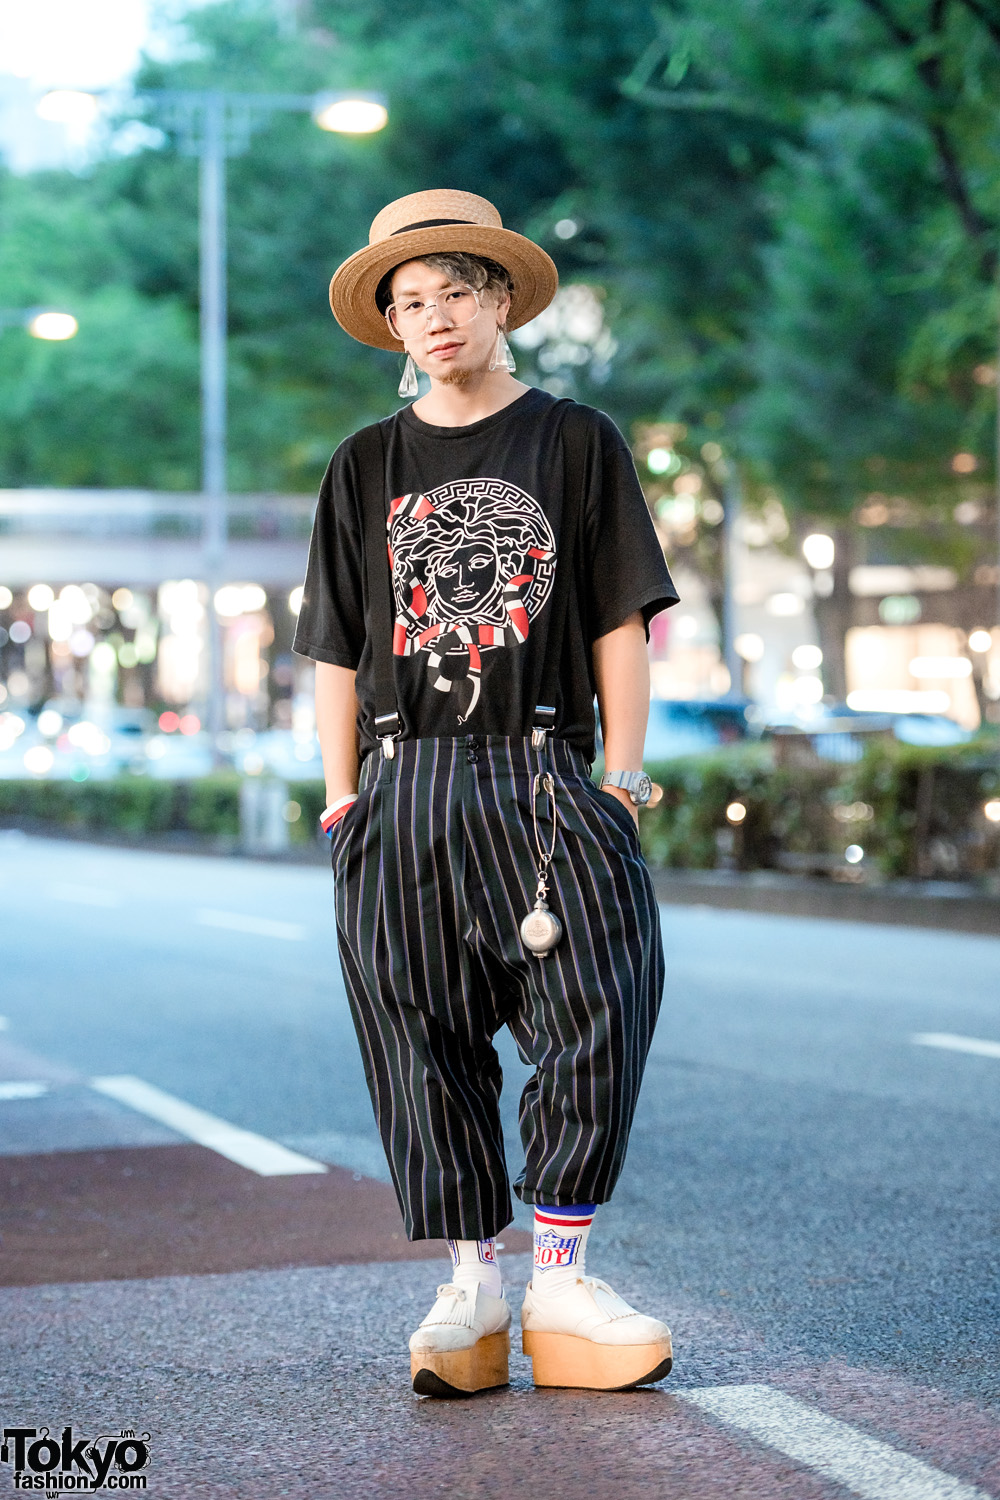 Harajuku Mens Street Style w/ Quite Well T-Shirt, Striped Pants, Suspenders & Vivienne Westwood Rocking Horse Shoes